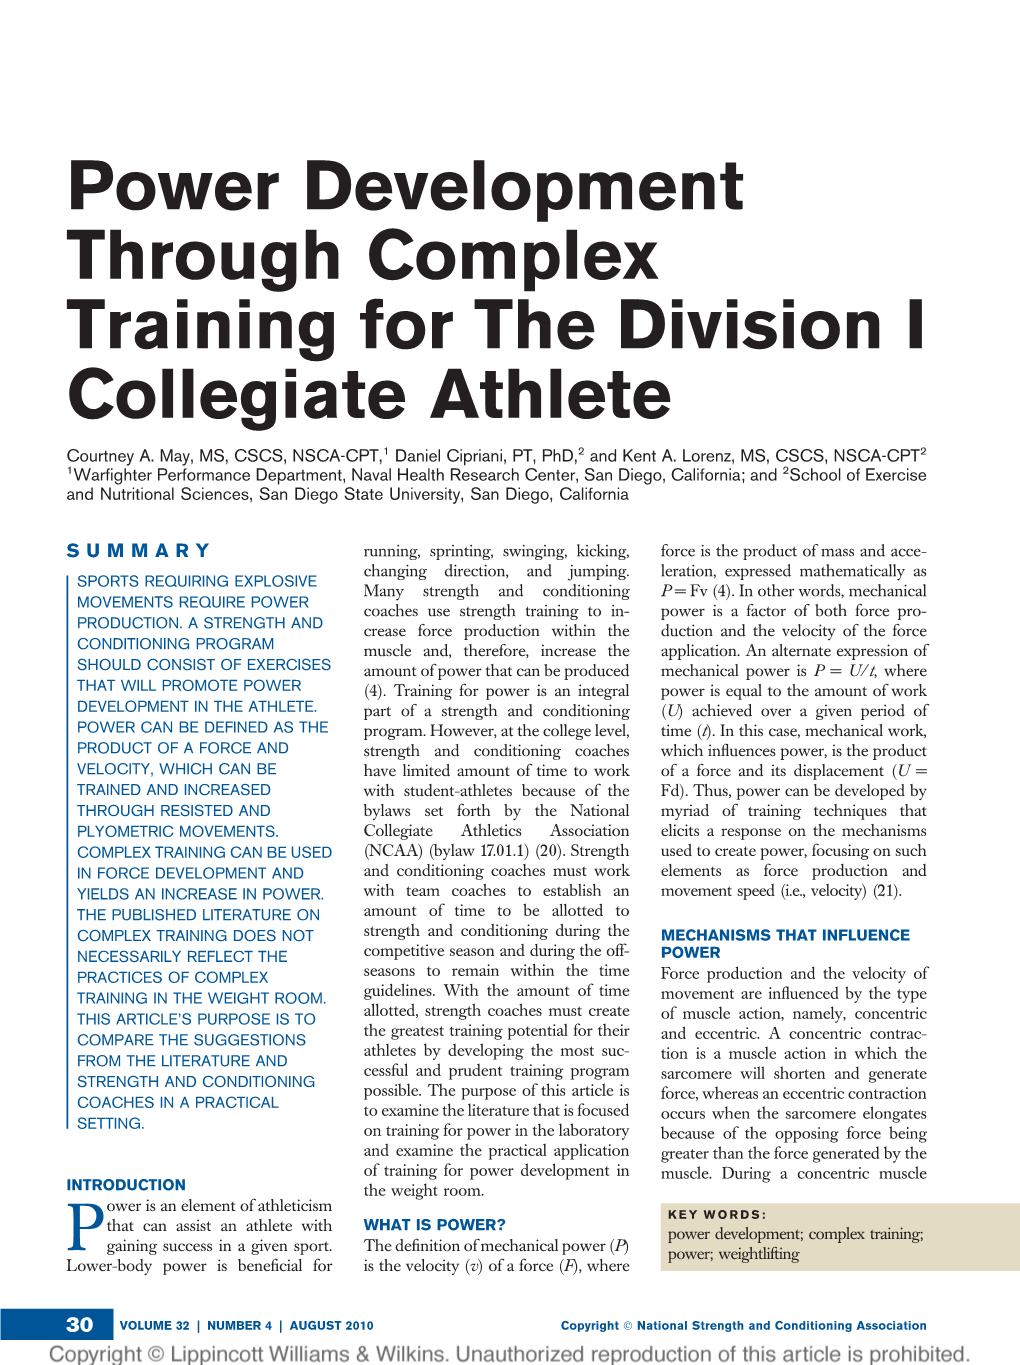 Power Development Through Complex Training for the Division I Collegiate Athlete Courtney A